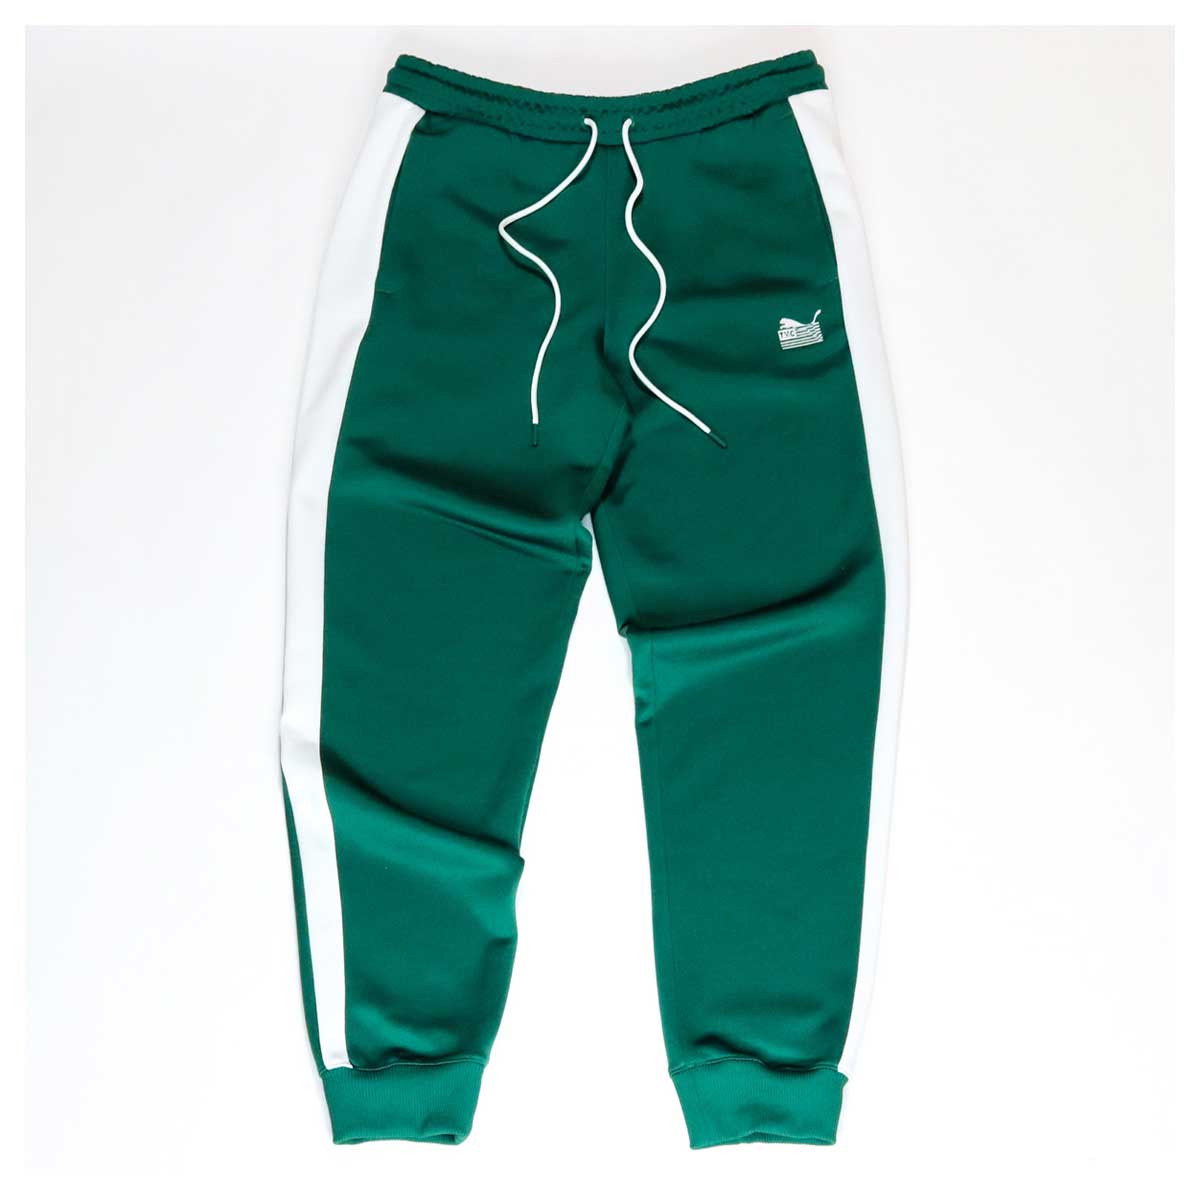 PUMA X TMC T7 Track Suit Pant - On The Run Green